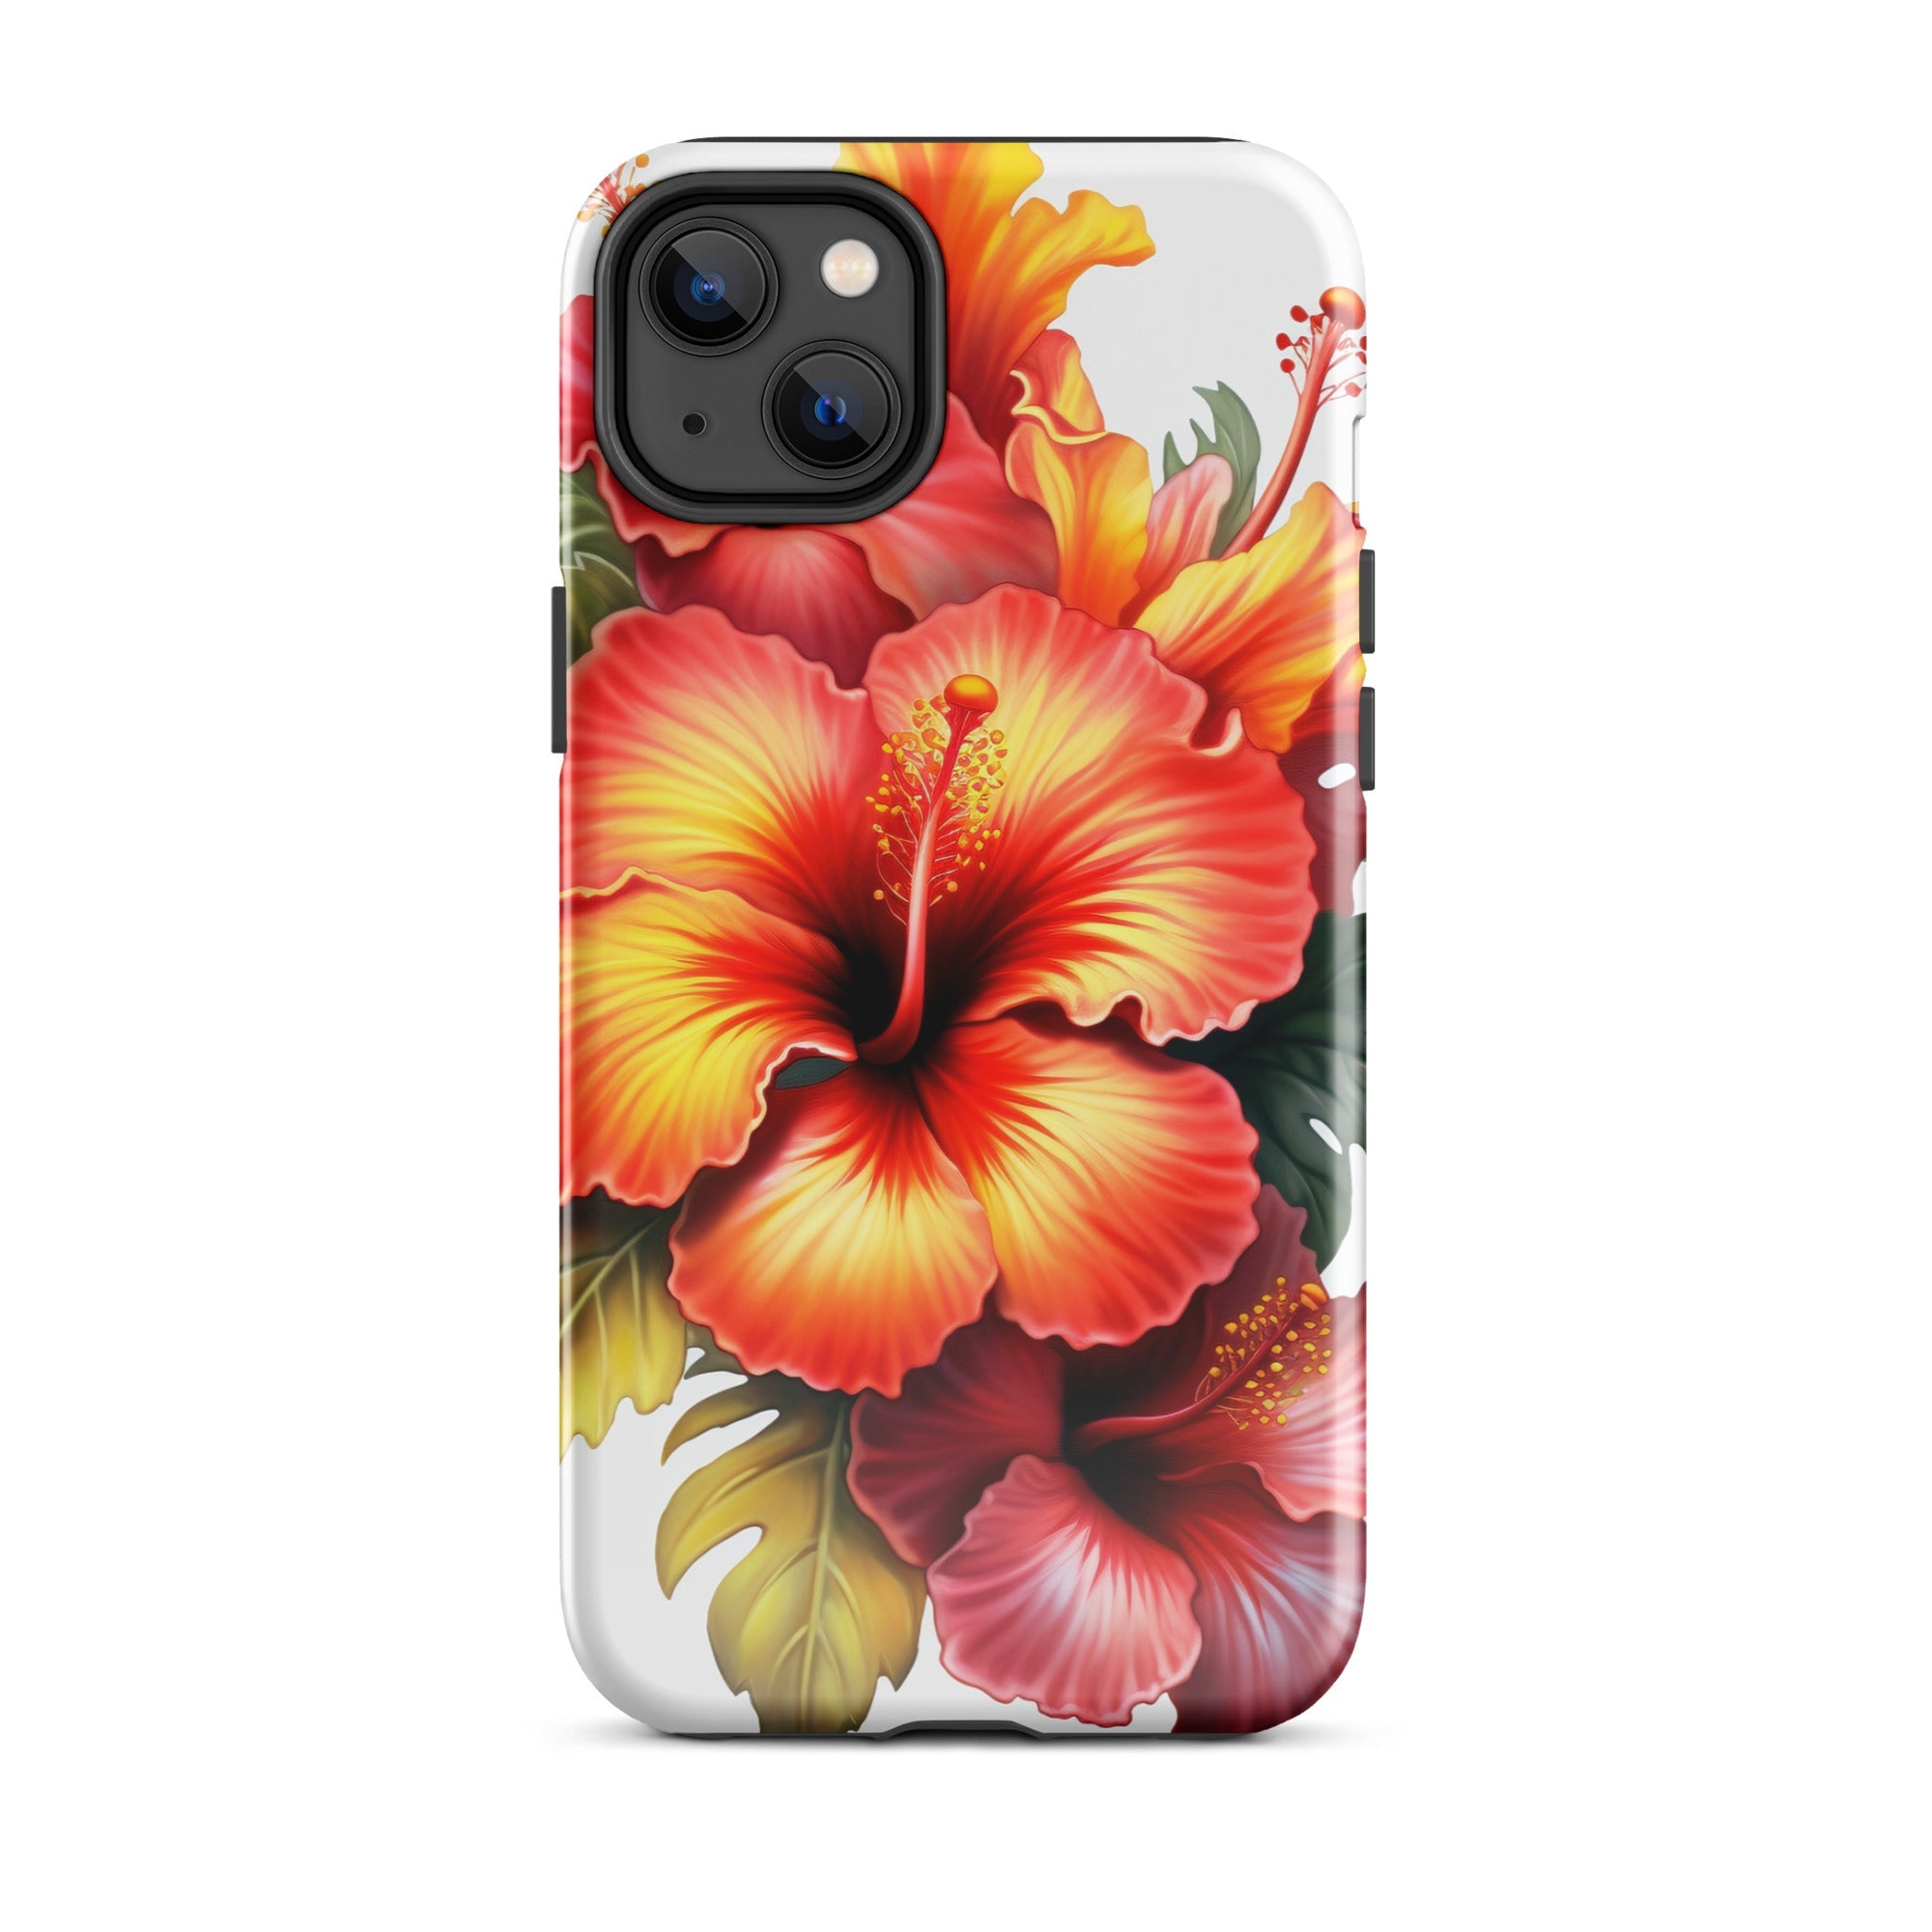 Hibiscus Flower iPhone Case by Visual Verse - Image 25